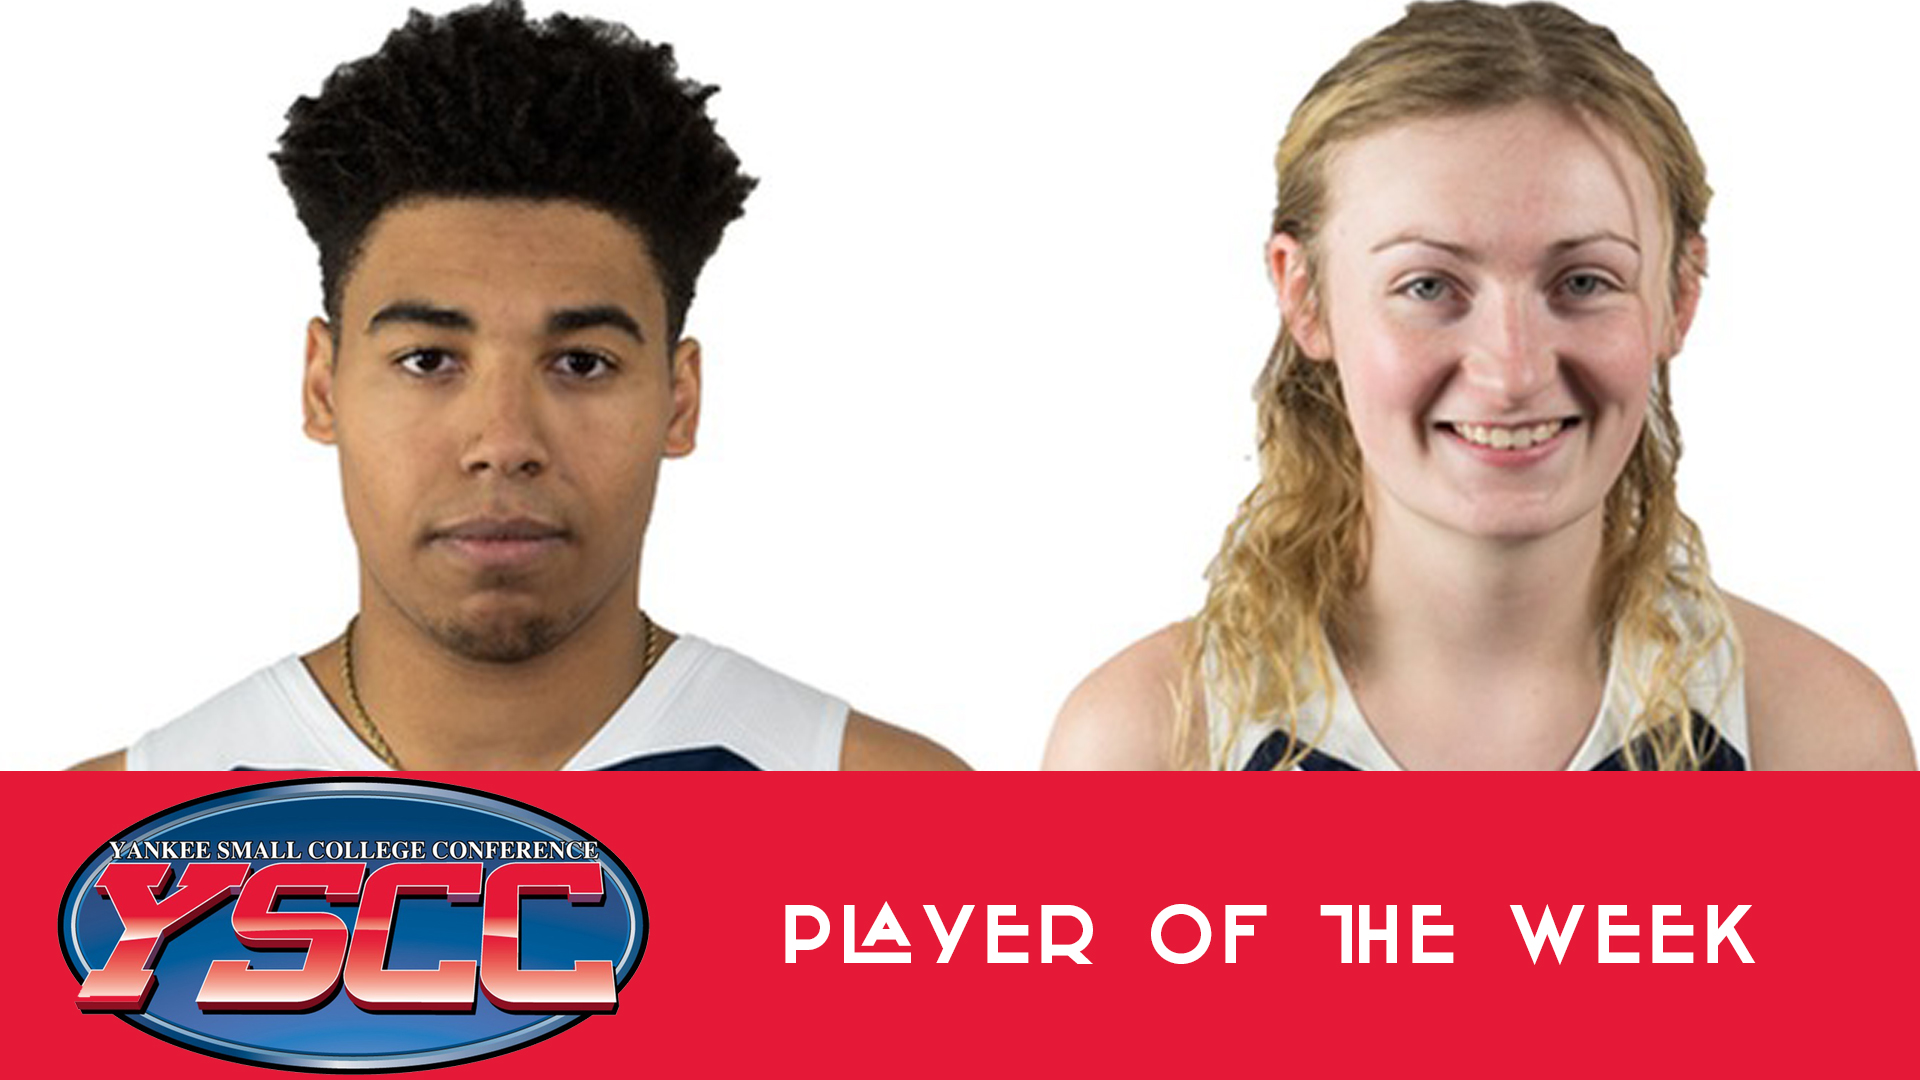 University of Maine Augusta players sweep YSCC Players of the Week